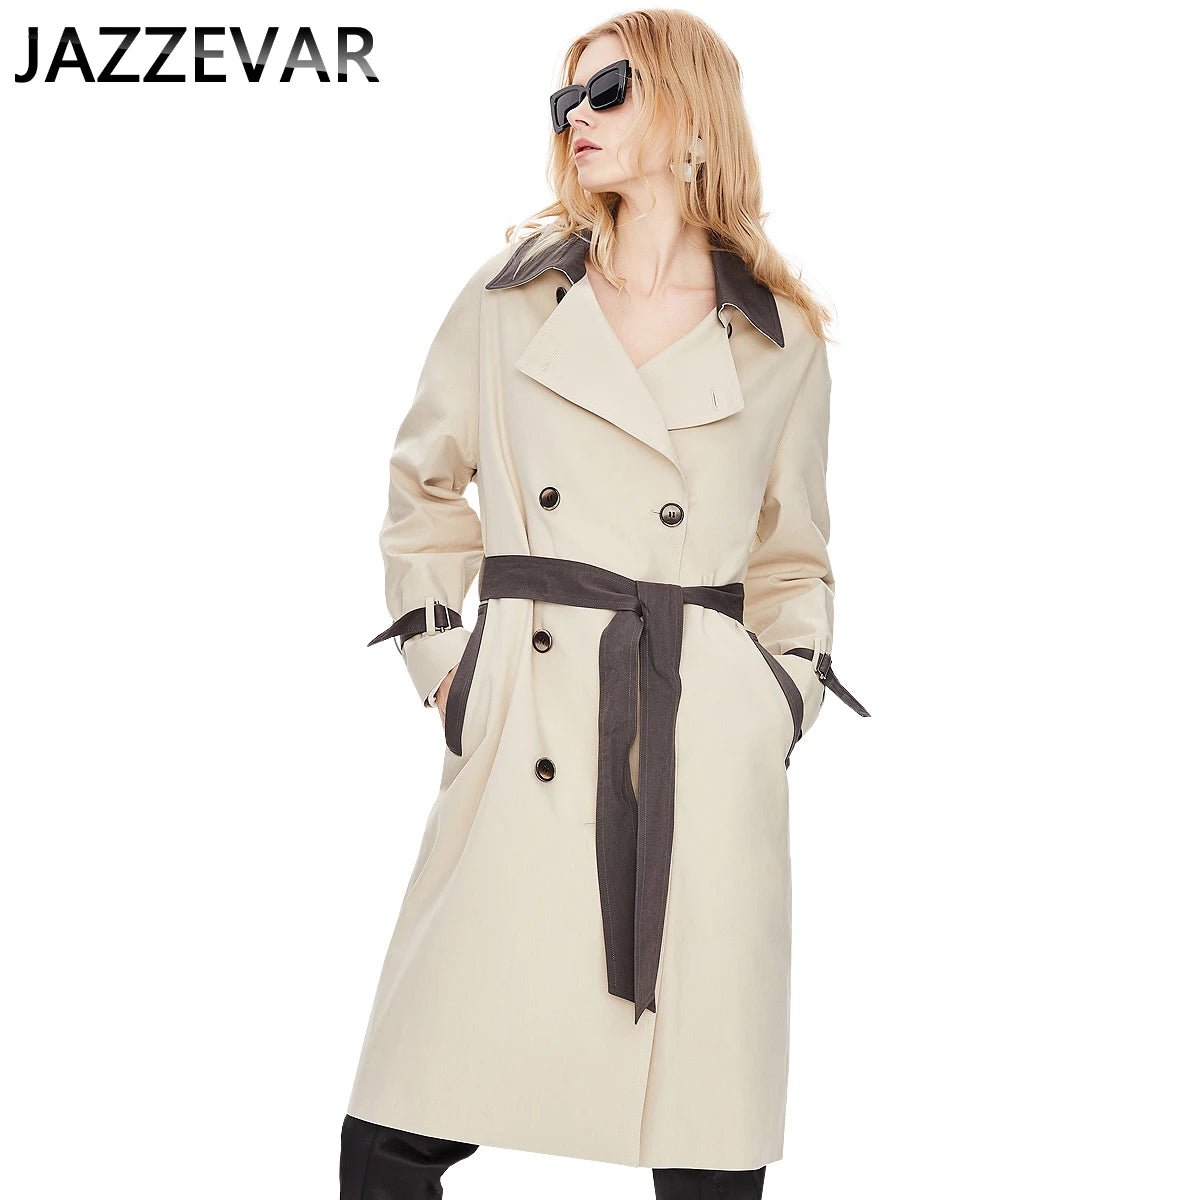 JAZZEVAR Women's Clothing Stitching Leather Collar Ladies Double-breasted Trench Coat Jacket Womens Coat Fashion Mid-length - Guy Christopher